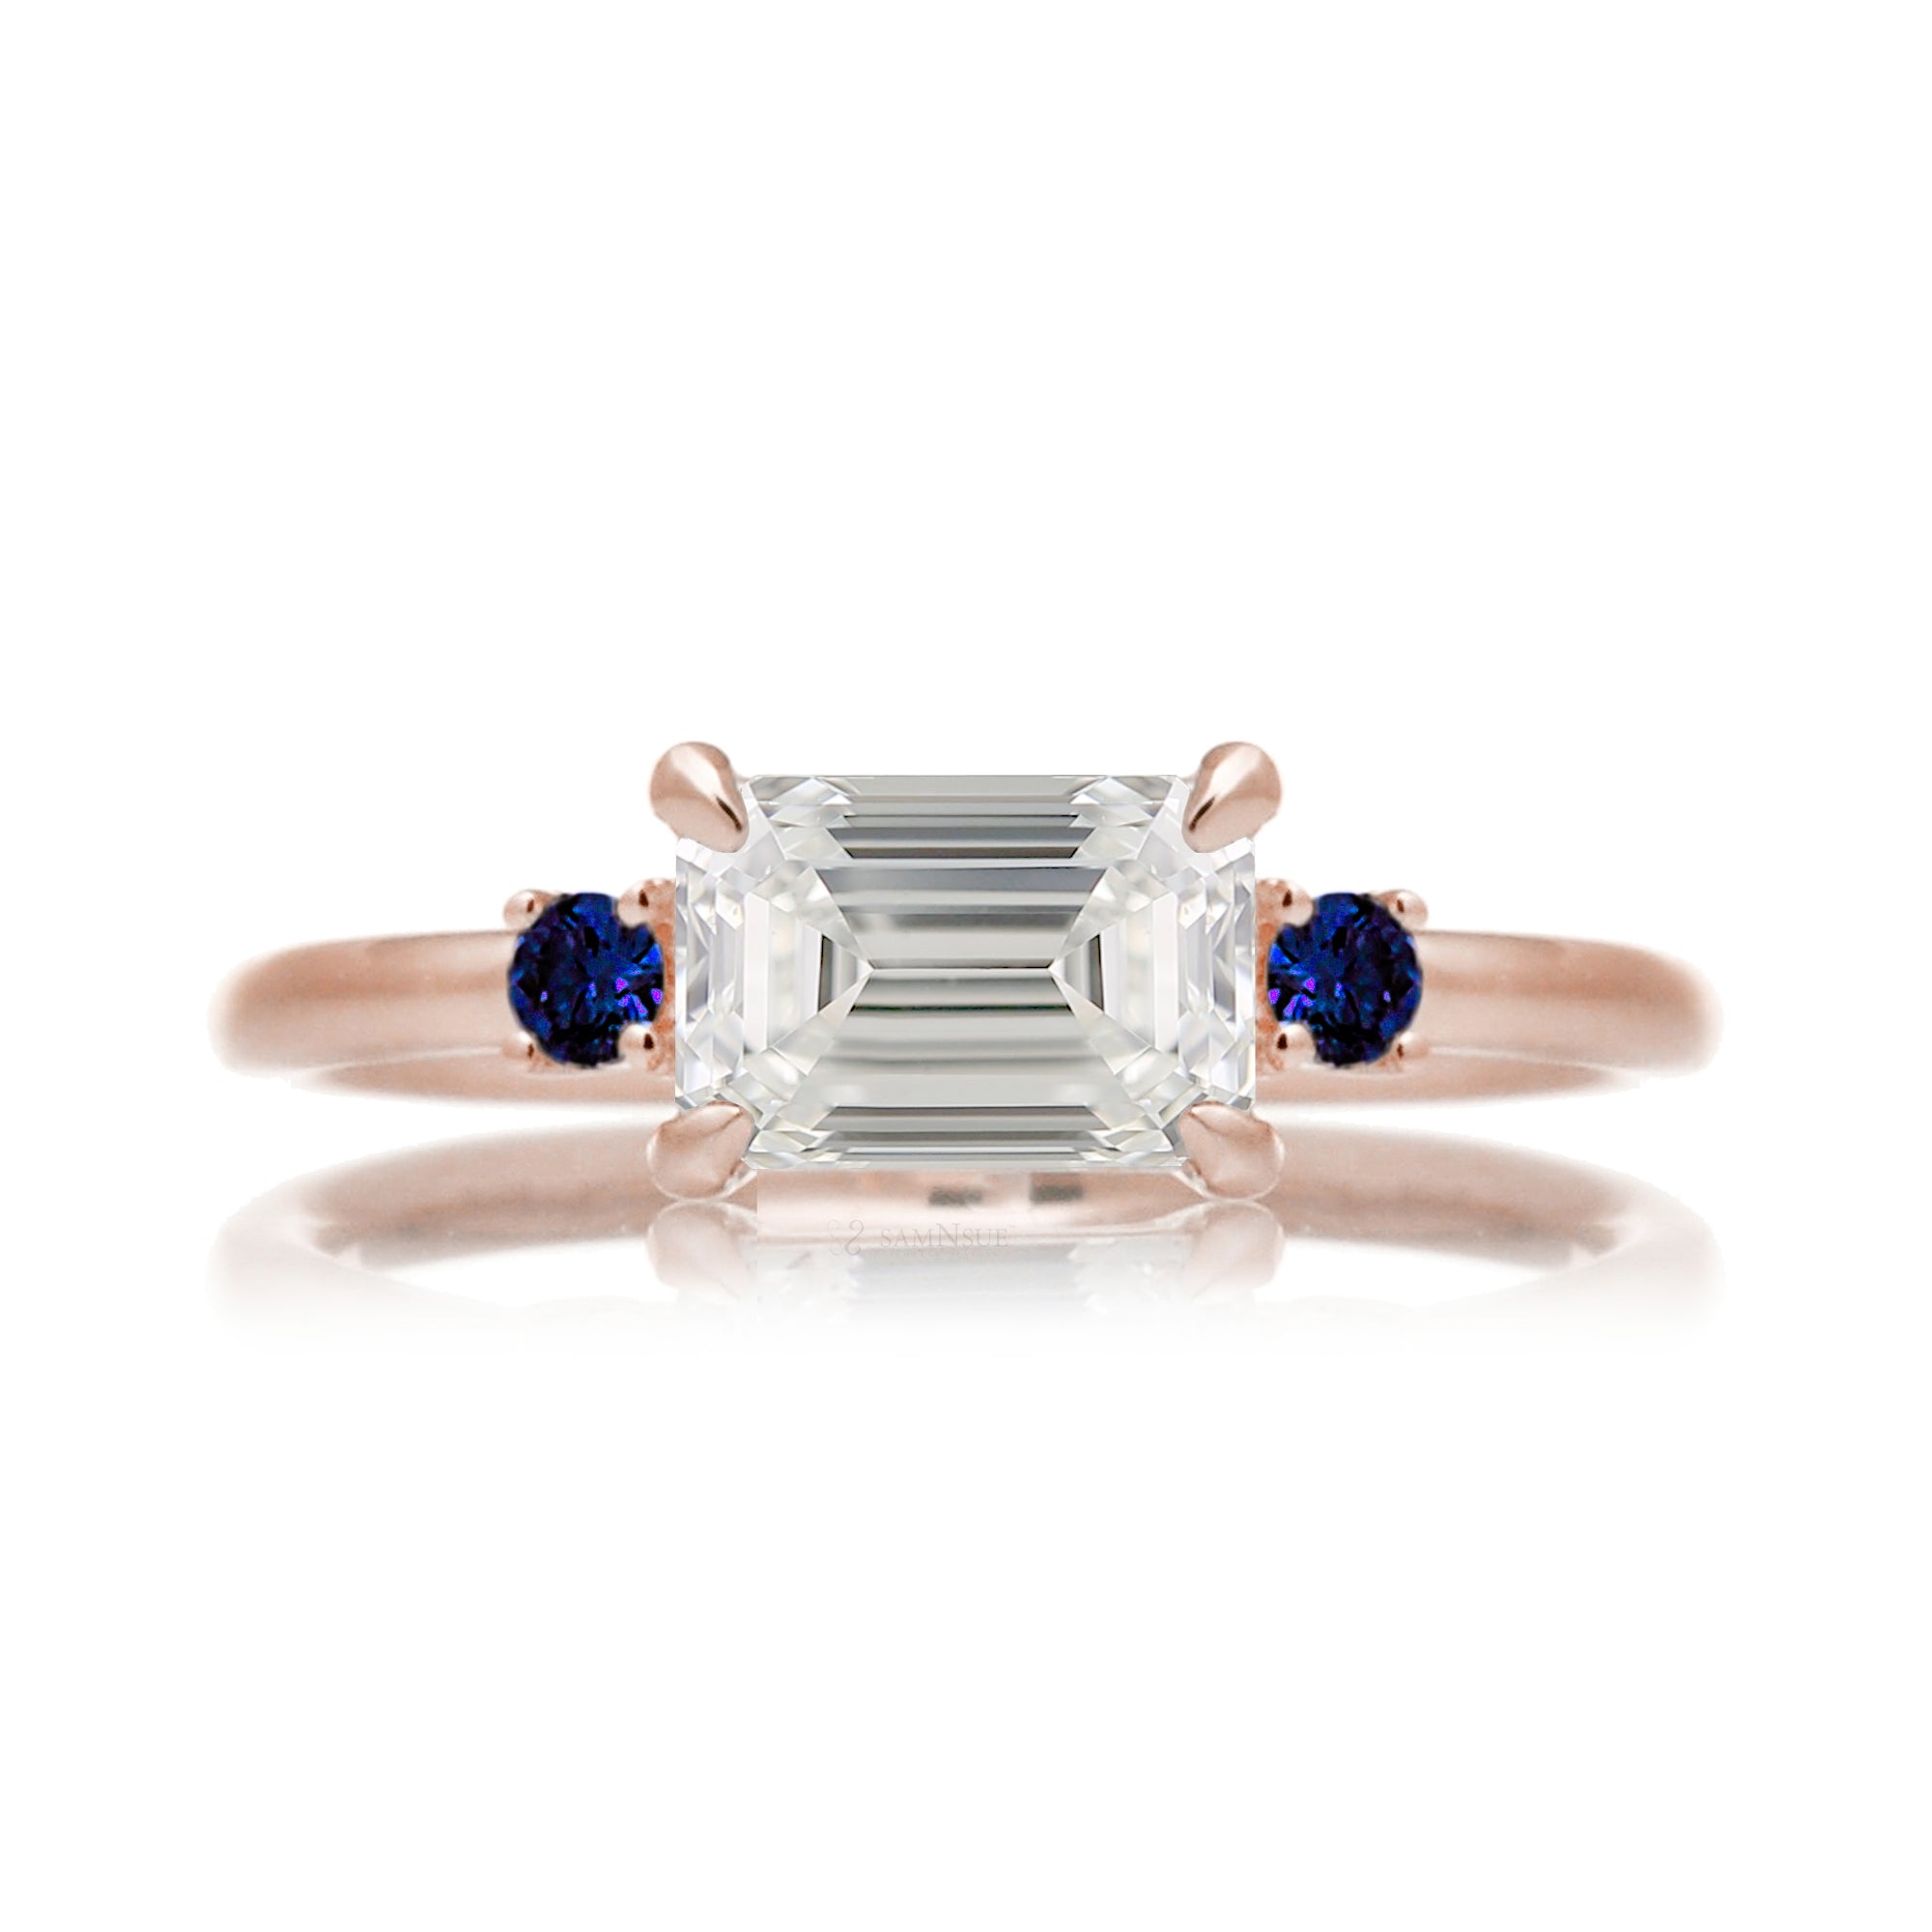 east-west emerald cut diamond three stone ring the Lena with side blue sapphires rose gold